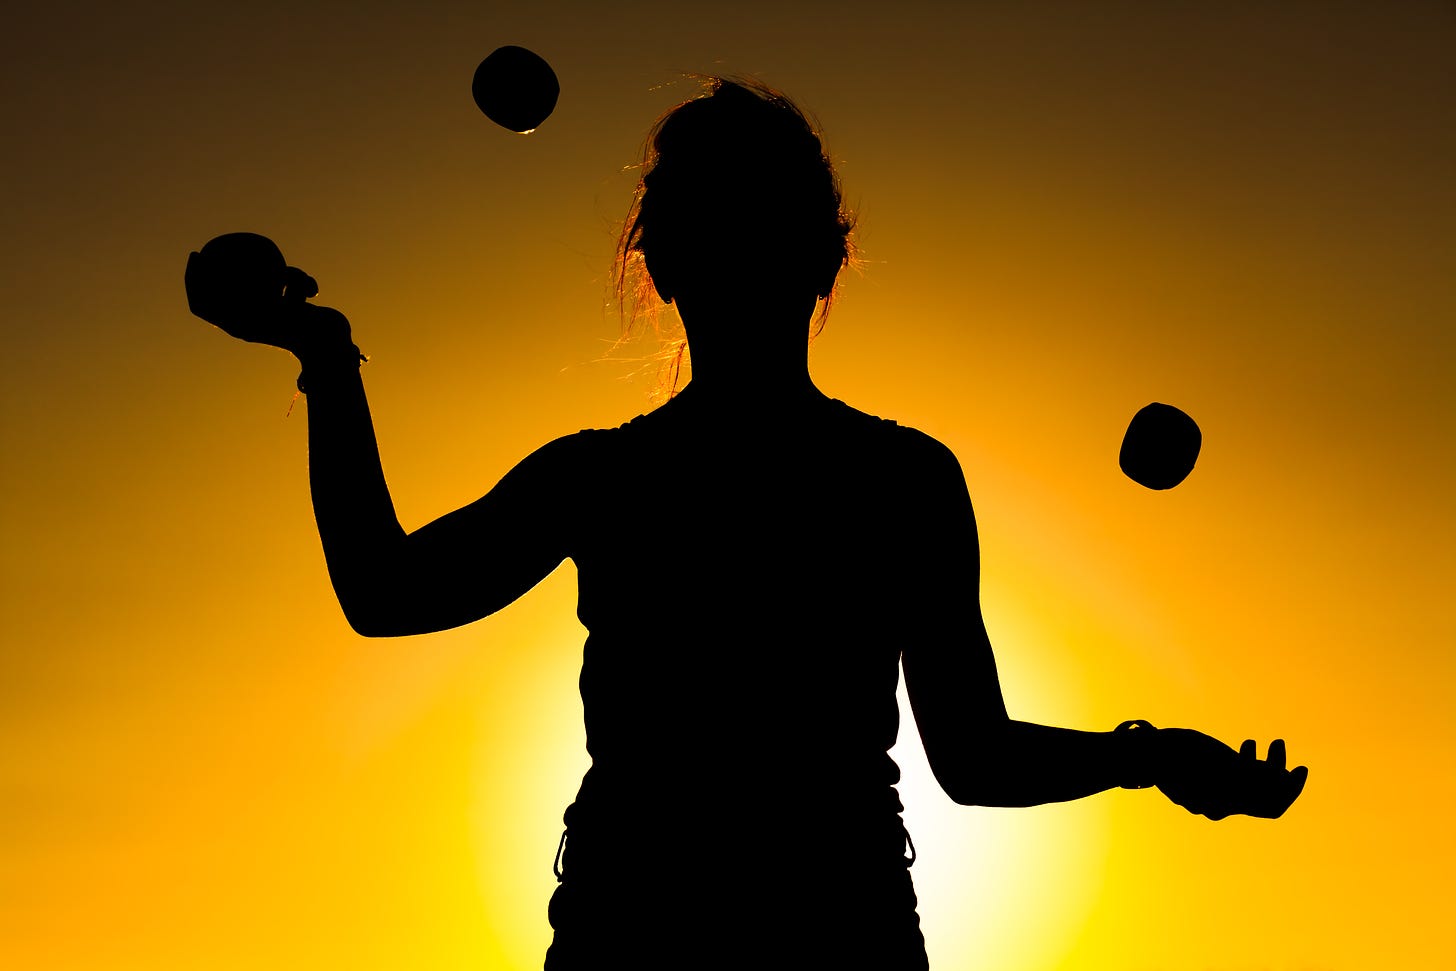 Adobe stock image of a woman juggling 3 balls in silhouette with the sun behind her